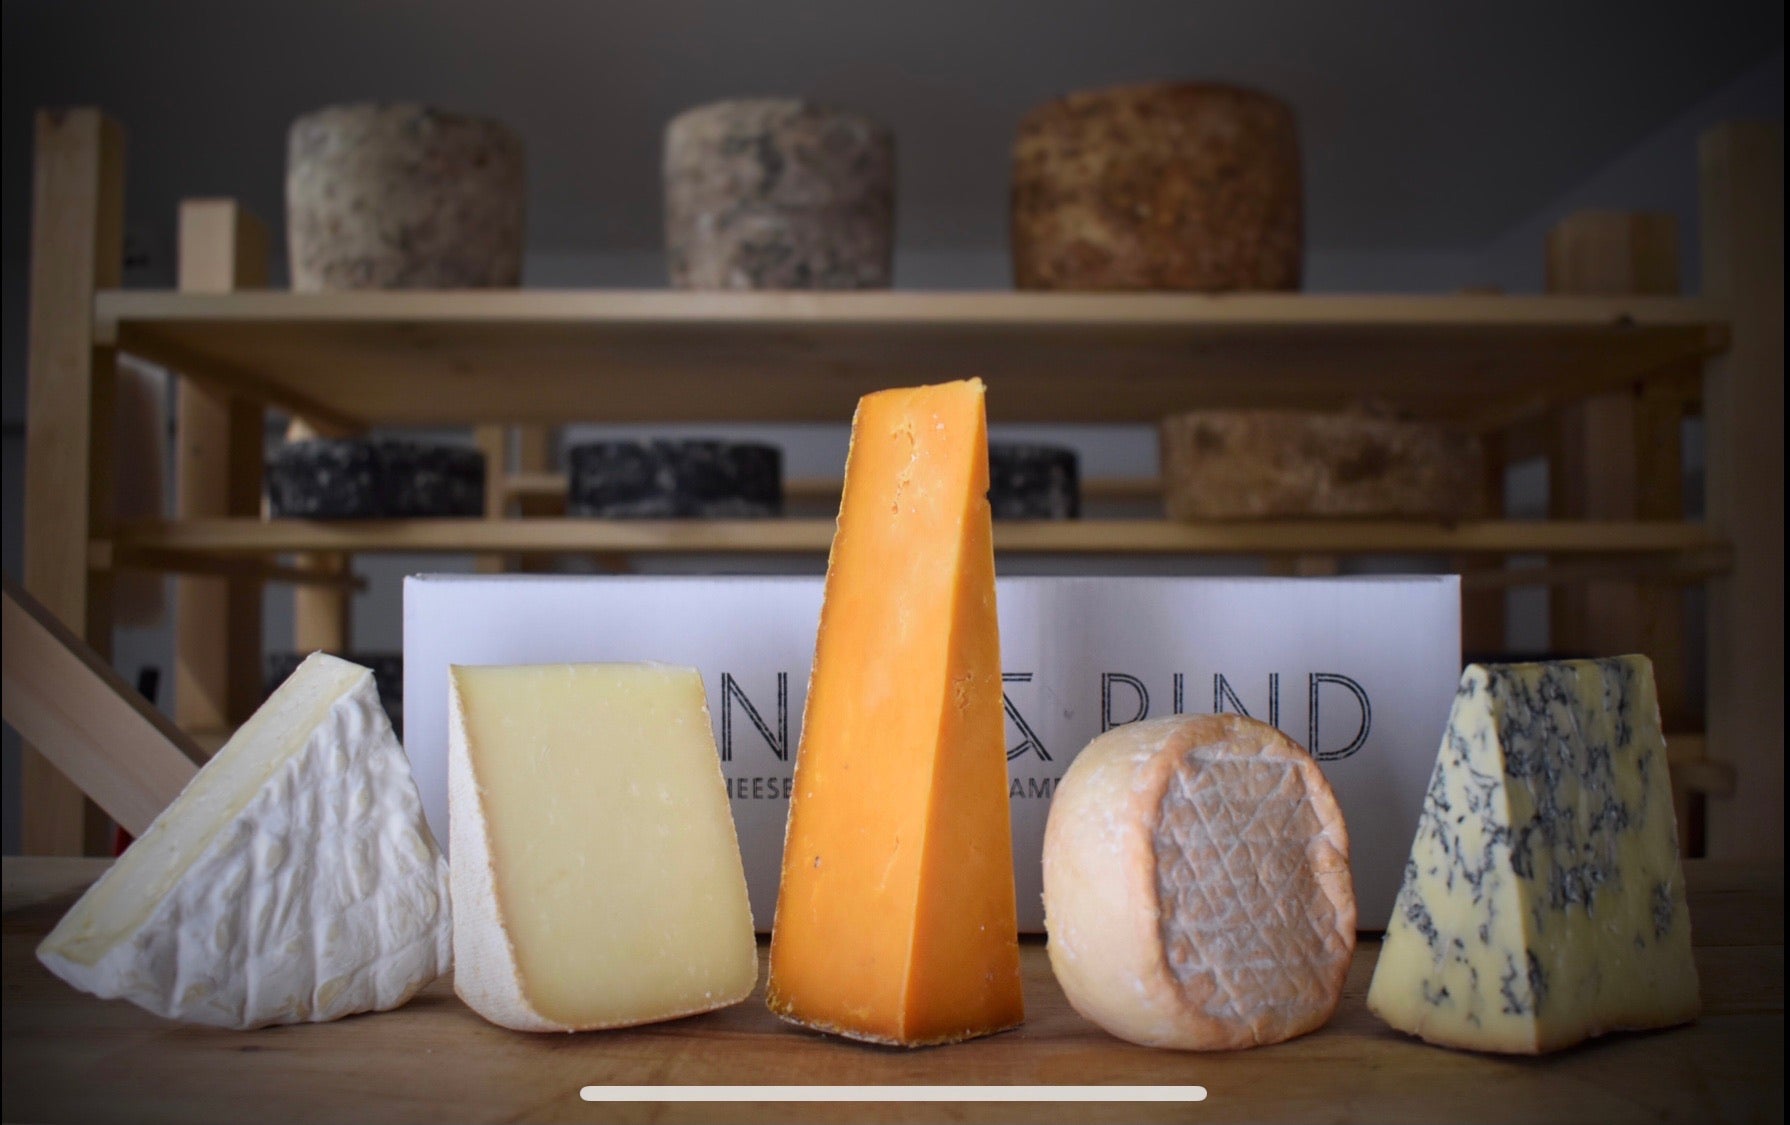 The Rennet & Rind British Cheese Subscription Box